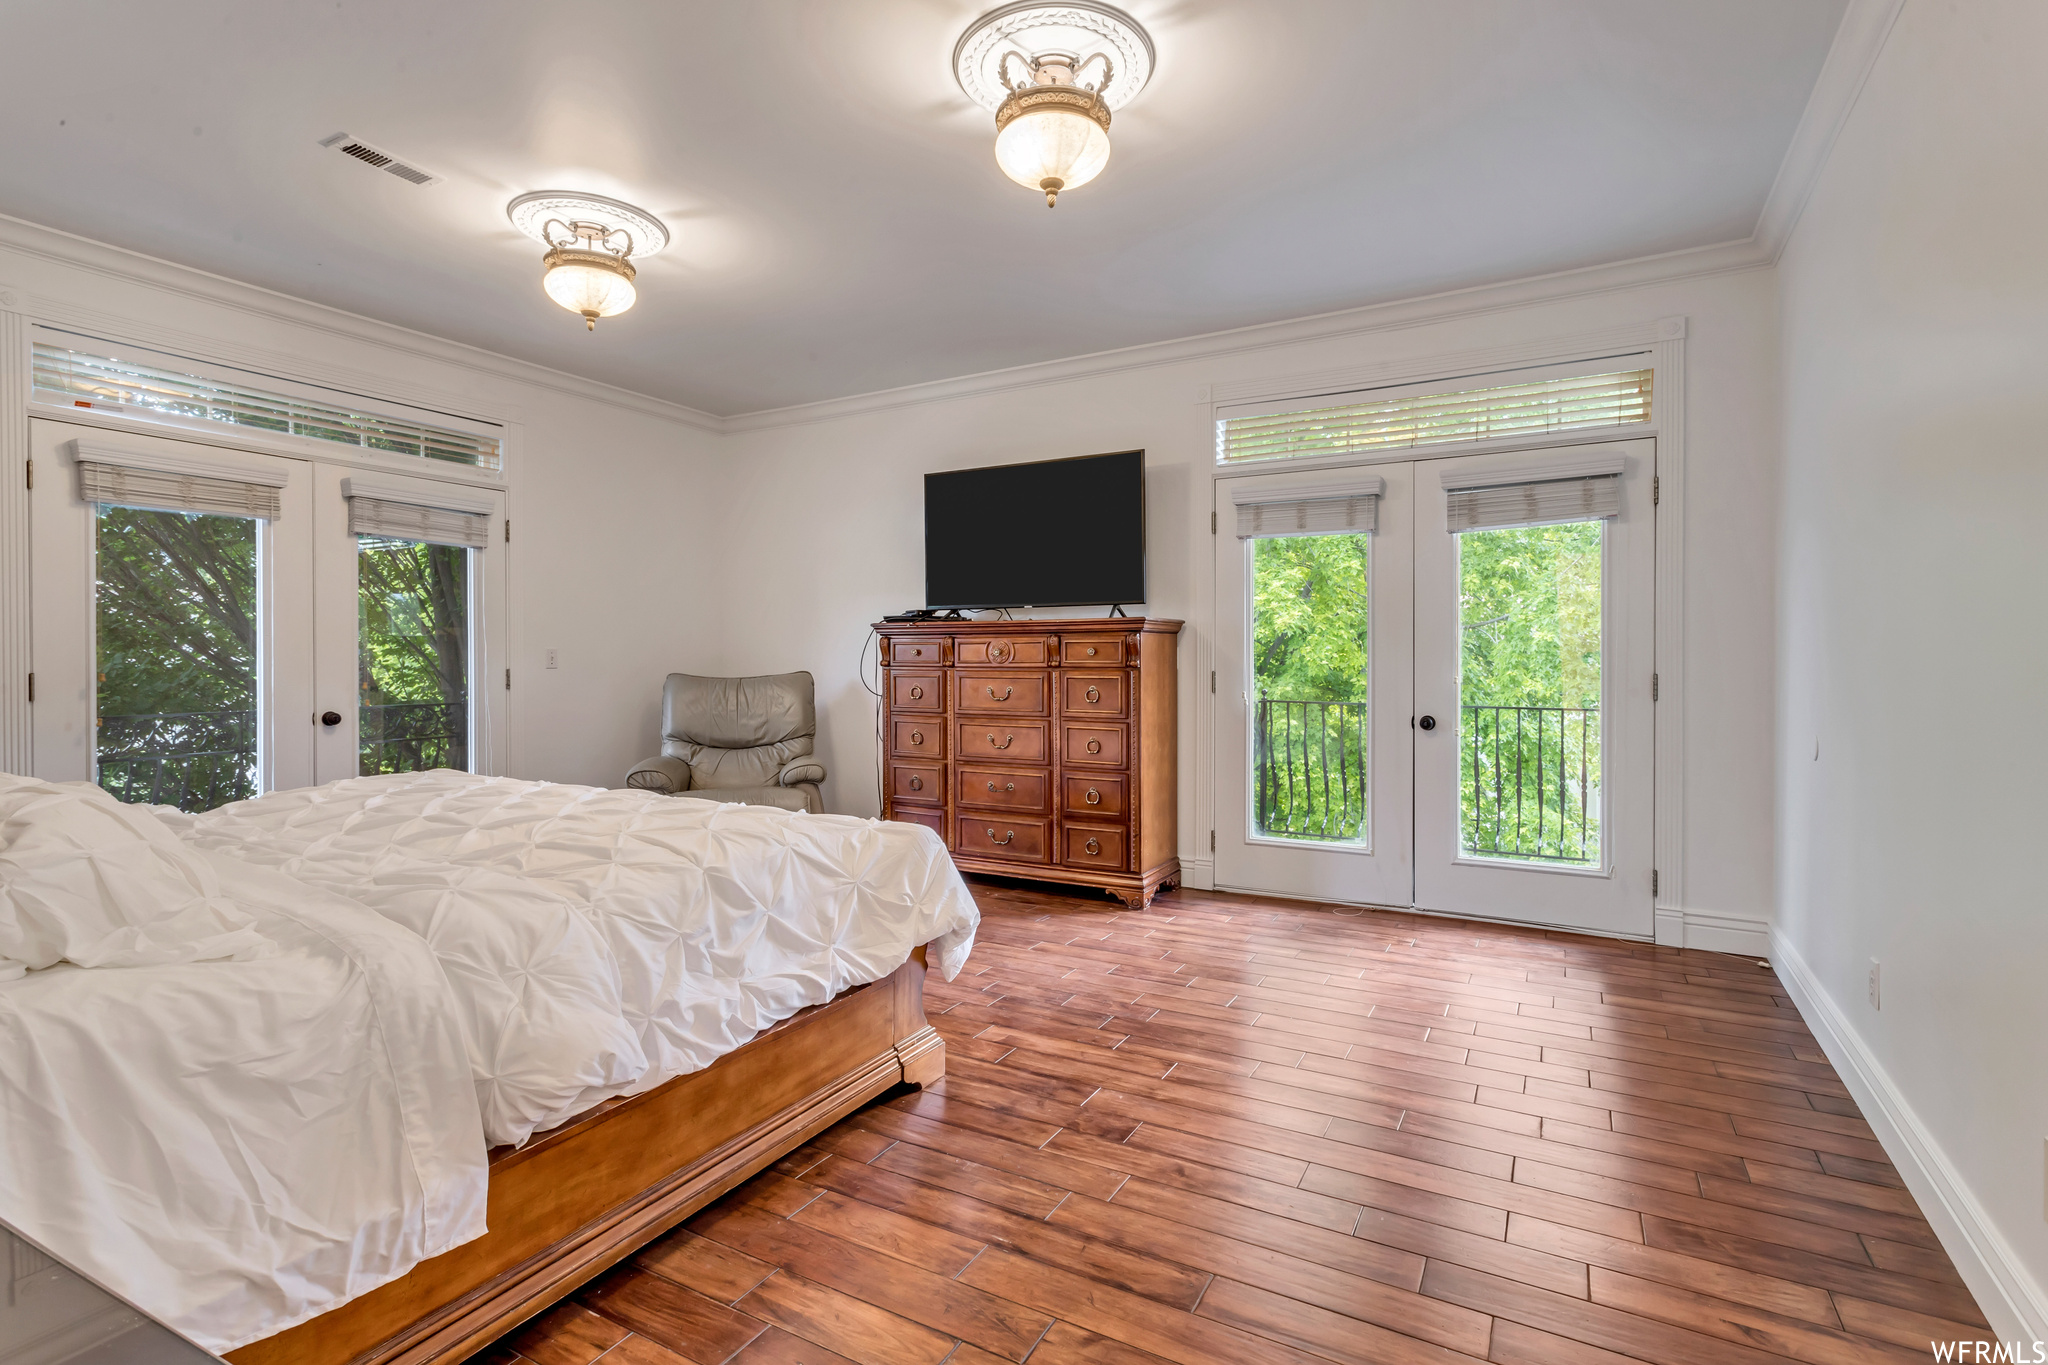 Bedroom featuring light parquet floors, crown molding, multiple windows, and french doors